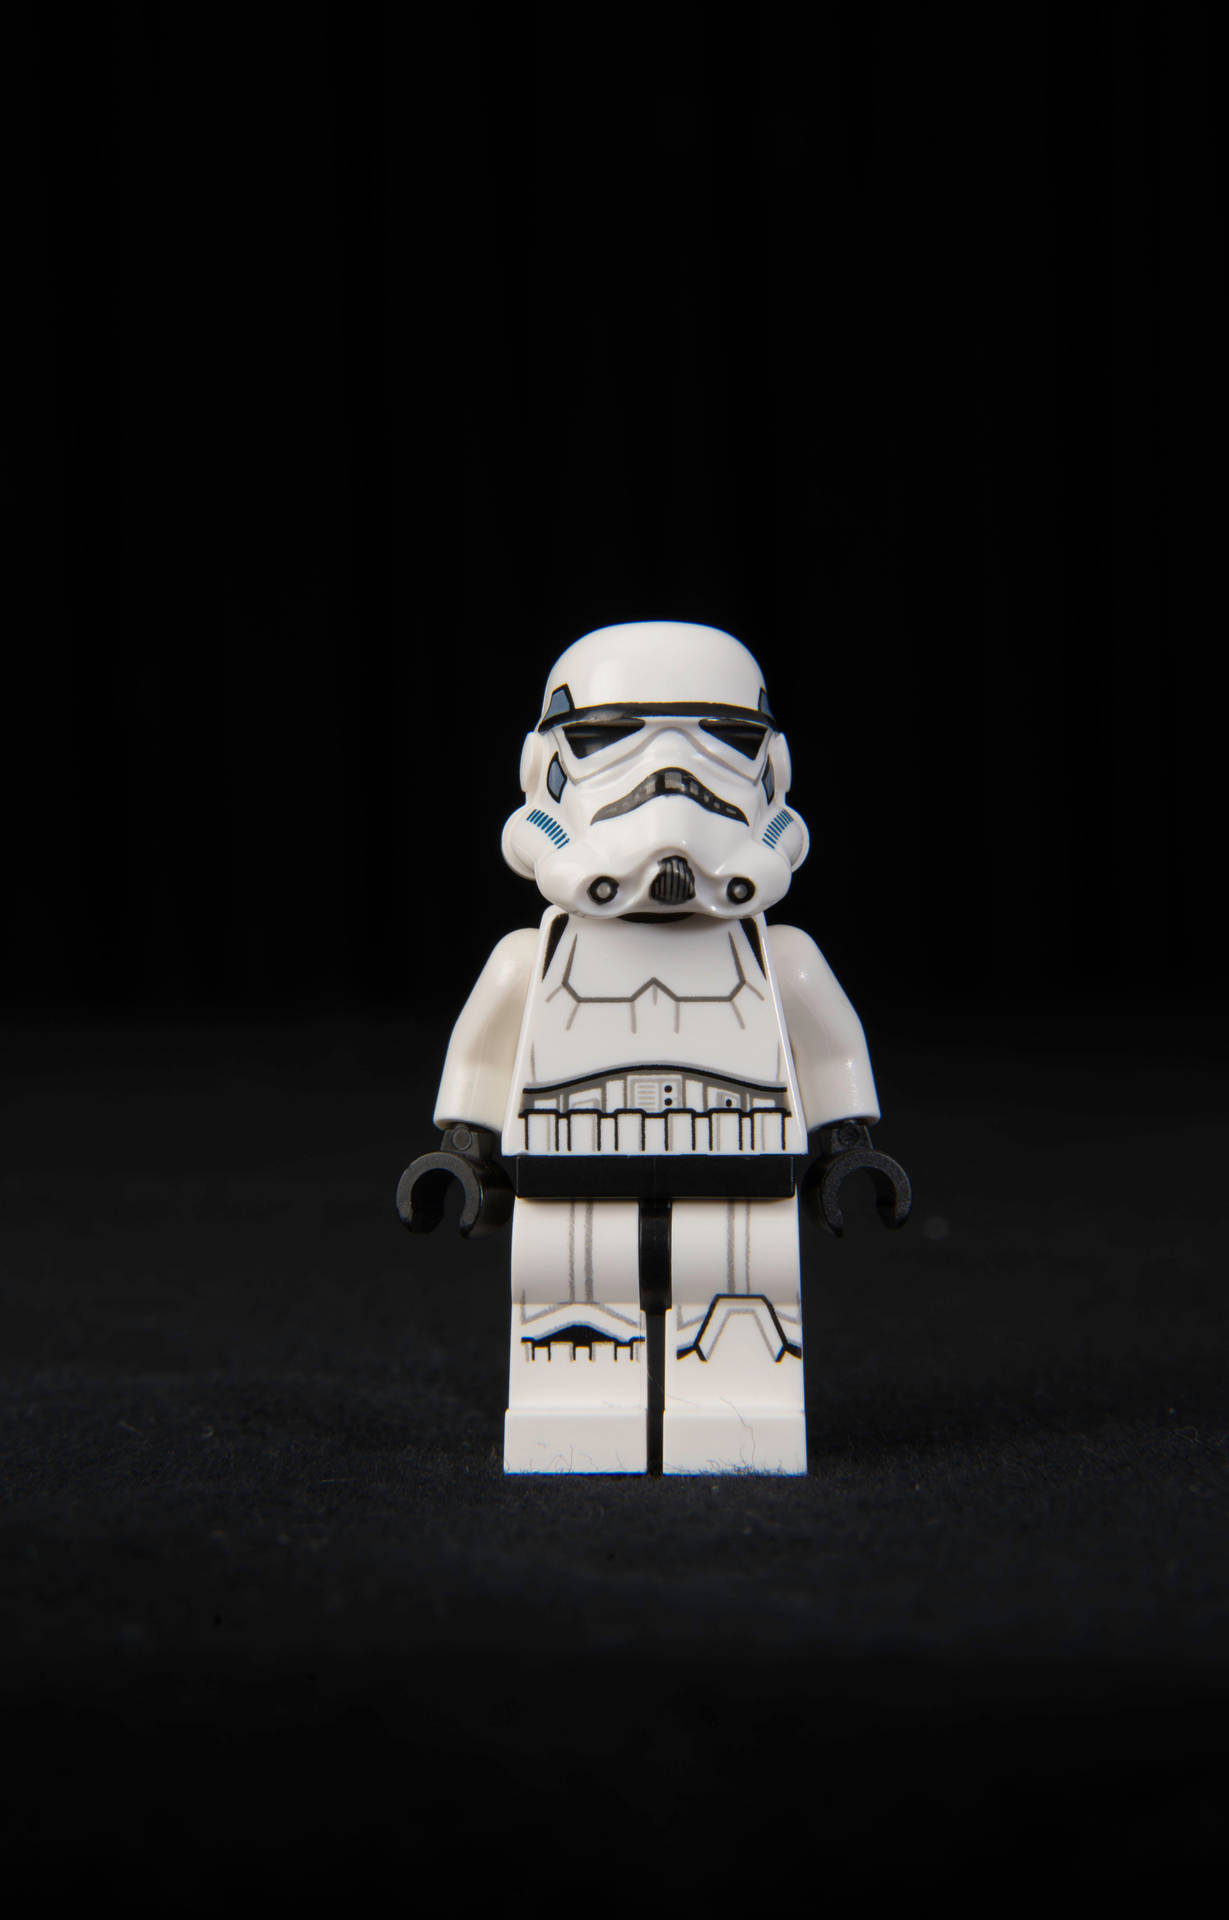 Stormtrooper 3728X5824 Wallpaper and Background Image